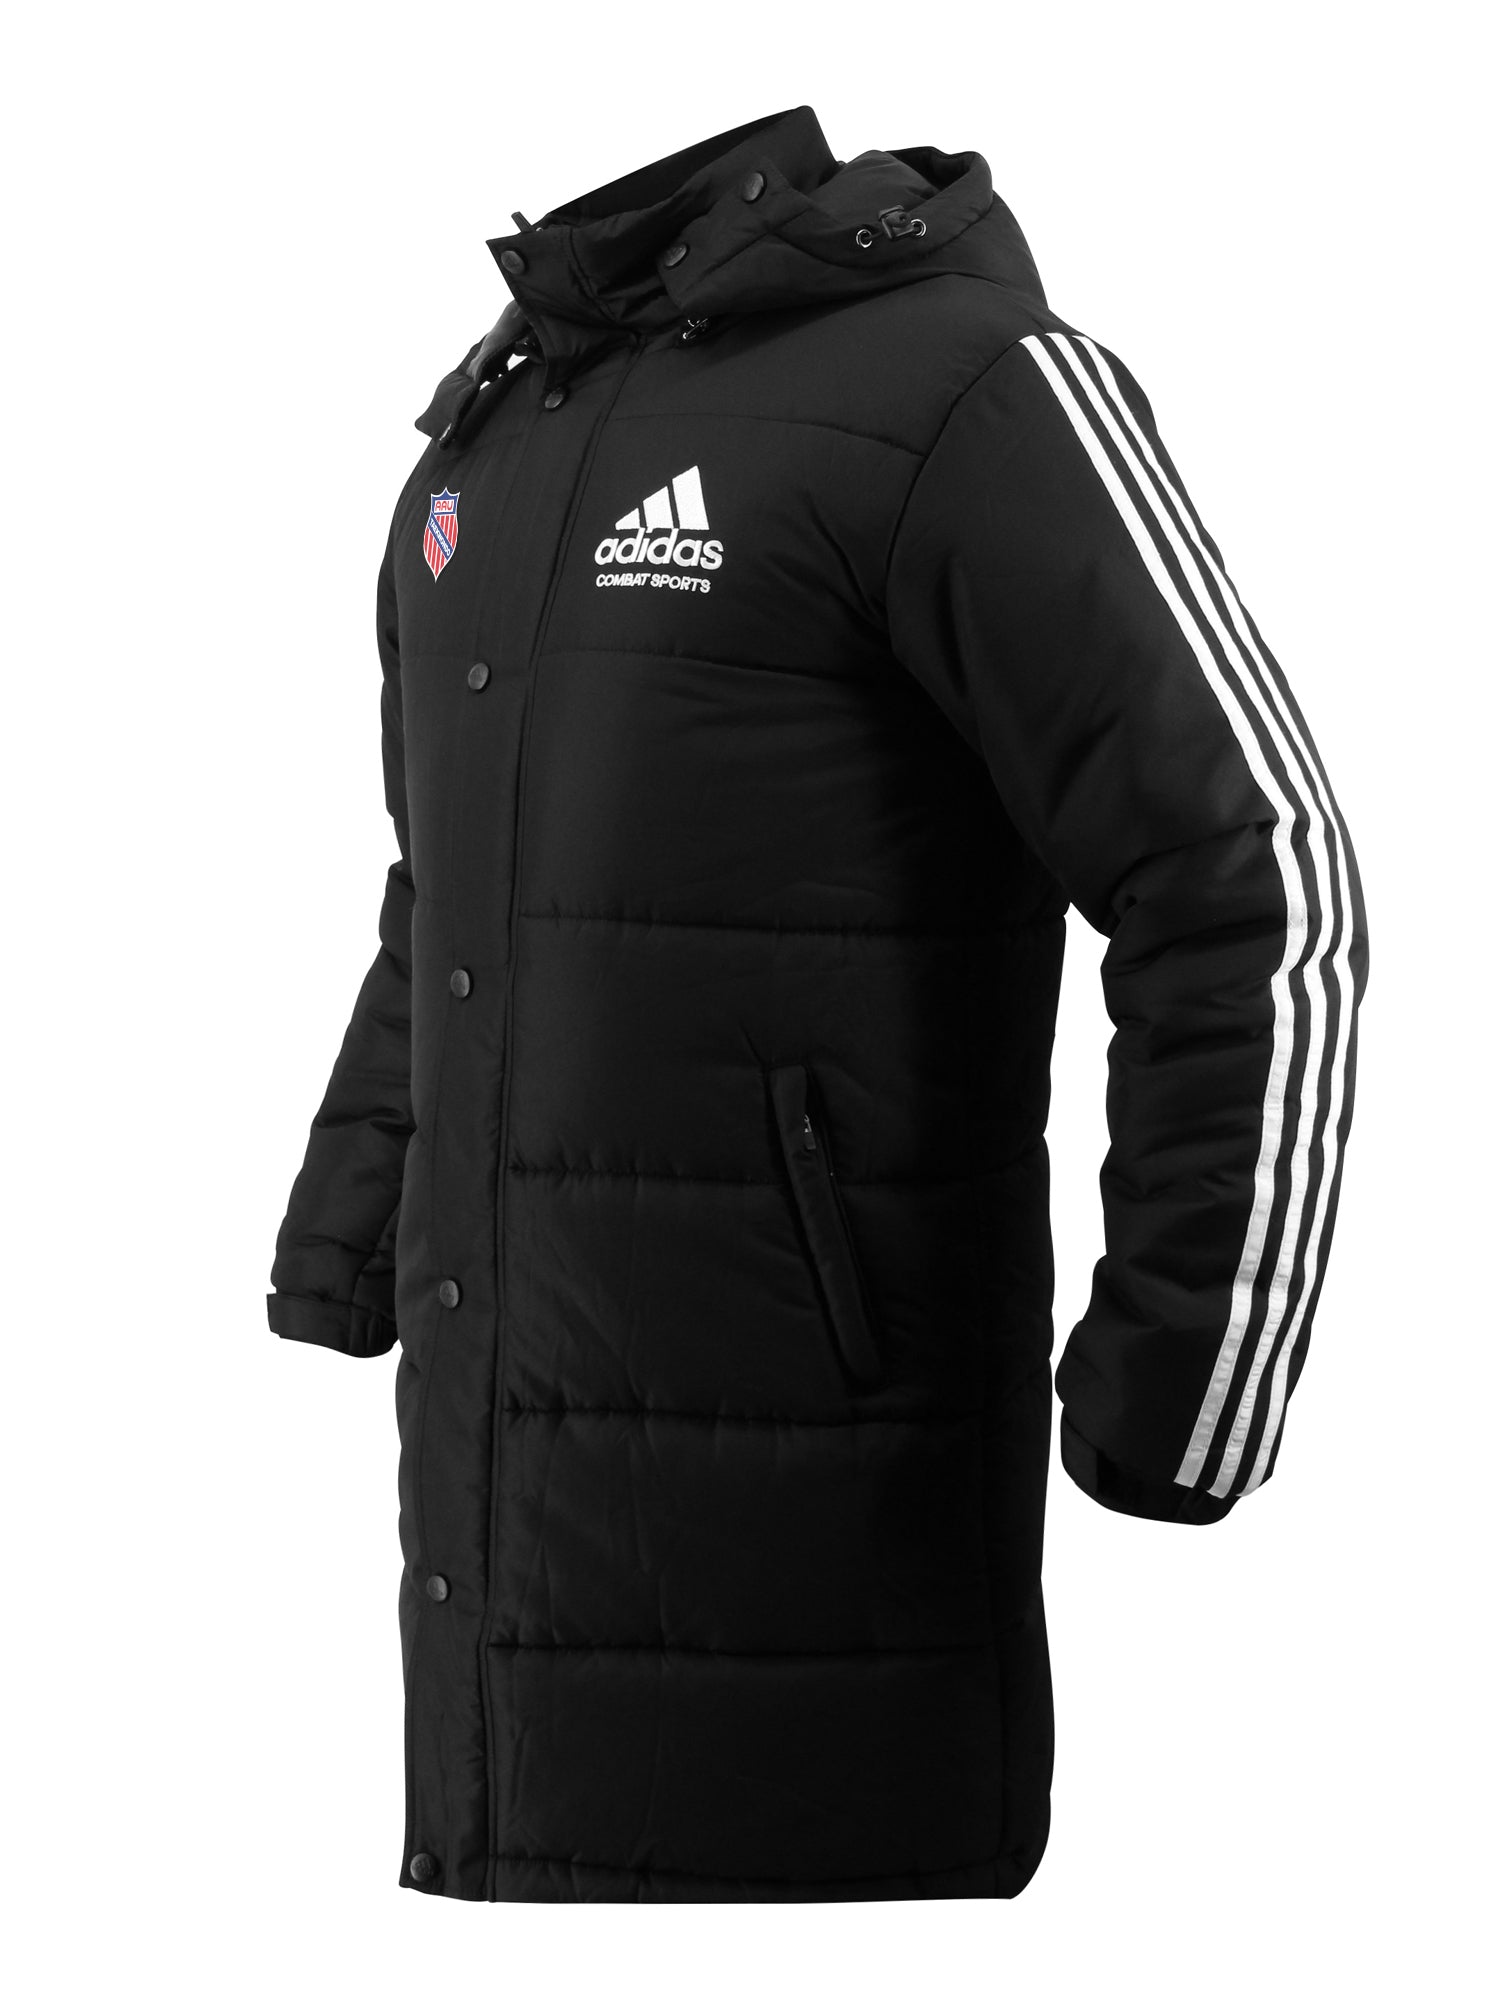 AAU Embroidered adidas Combat Sports Winter Long Padded Parka Jacket